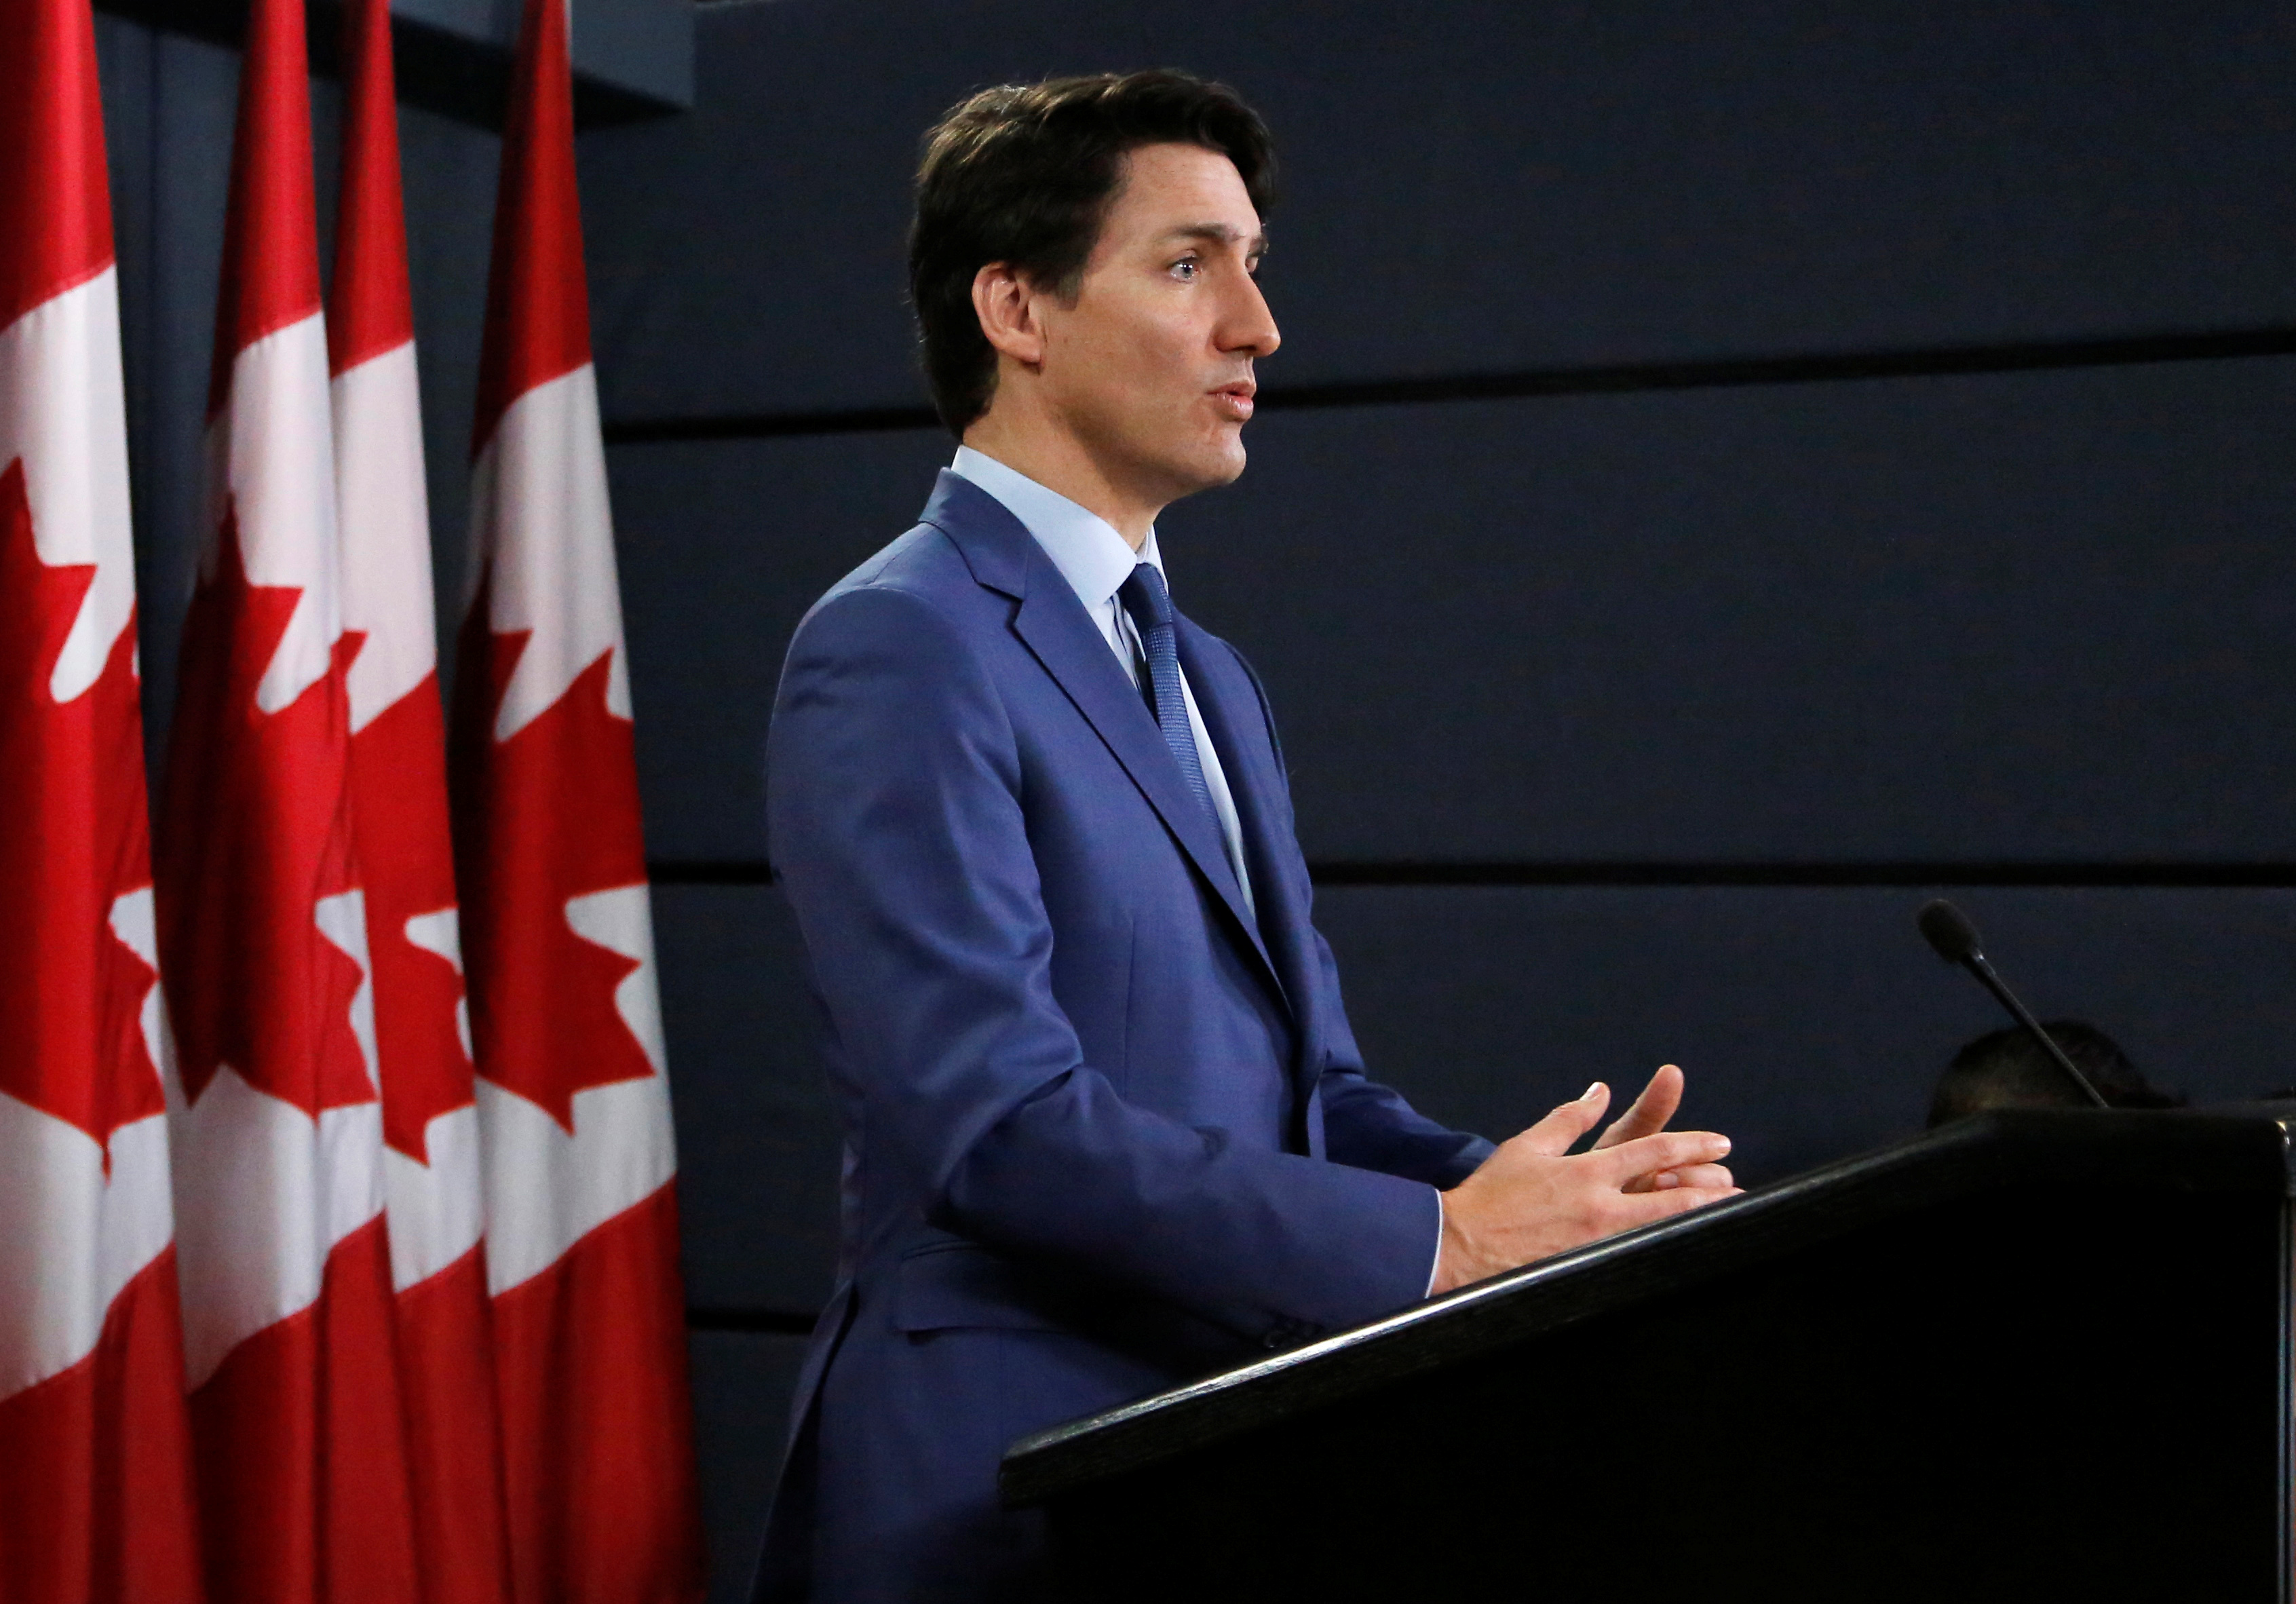 Canada's Prime Minister Justin Trudeau speaks at a news conference in Ottawa, Ontario, Canada, March 7, 2019. REUTERS/Patrick Doyle